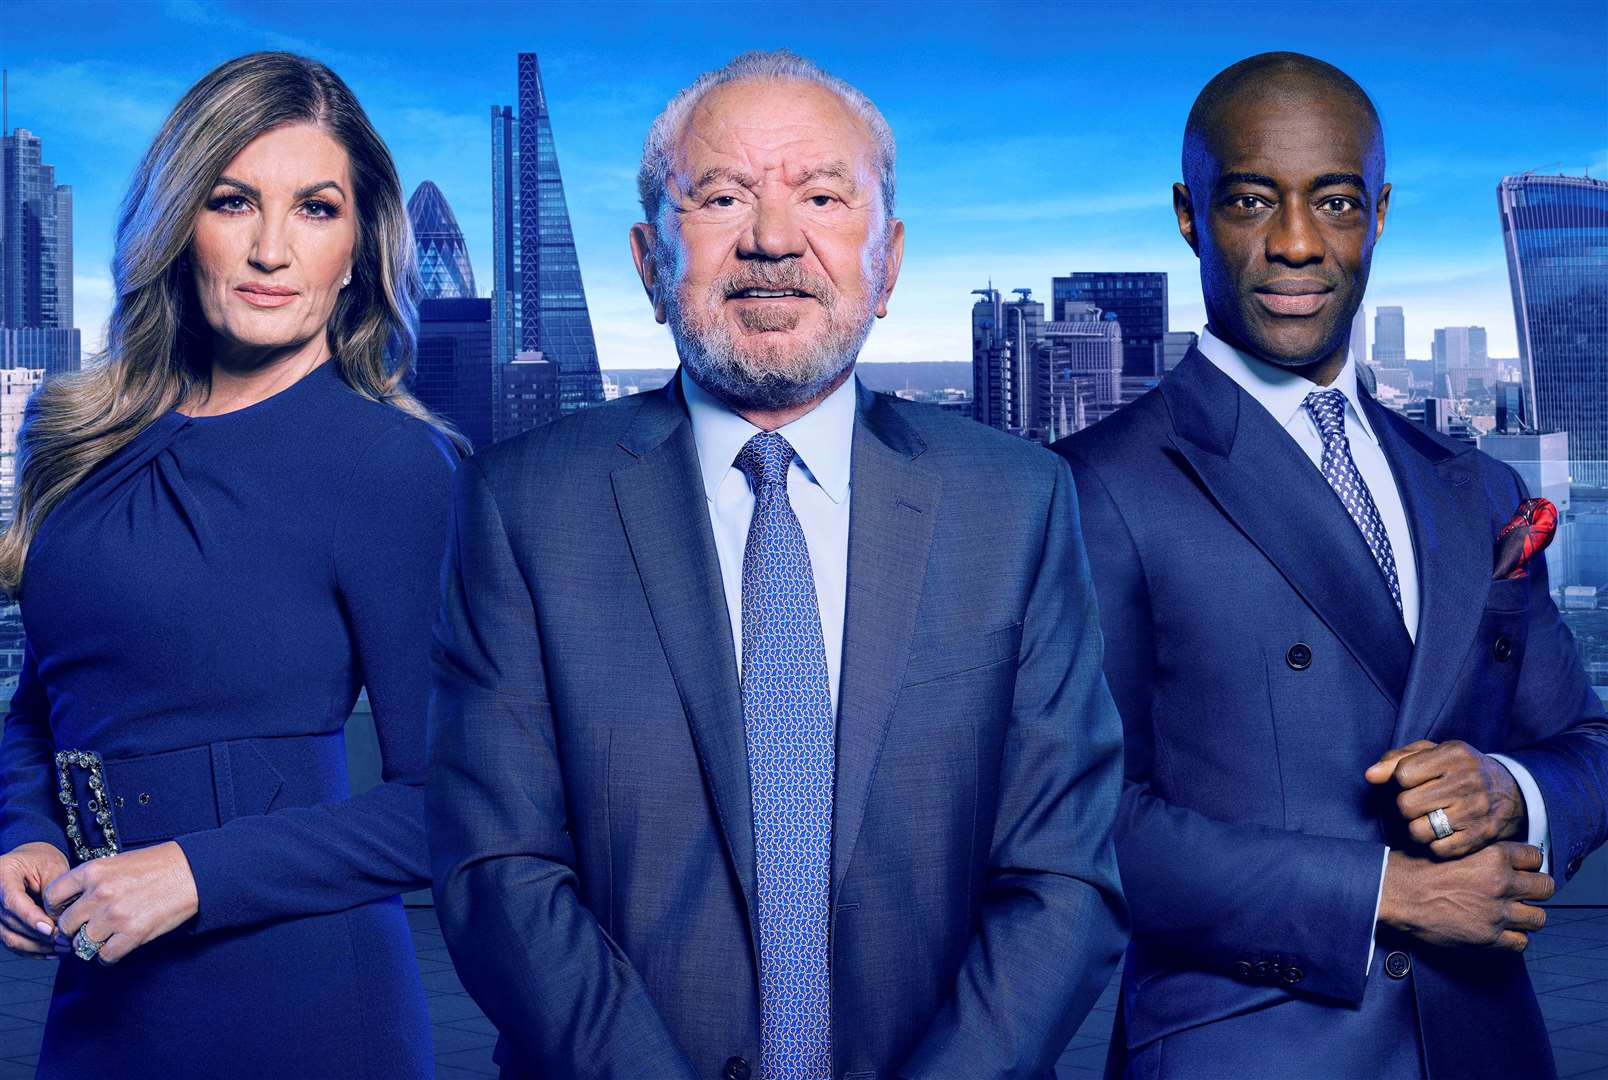 Baroness Brady, Lord Sugar and Tim Campbell - the man who won the very first series of the UK show. Picture: BBC